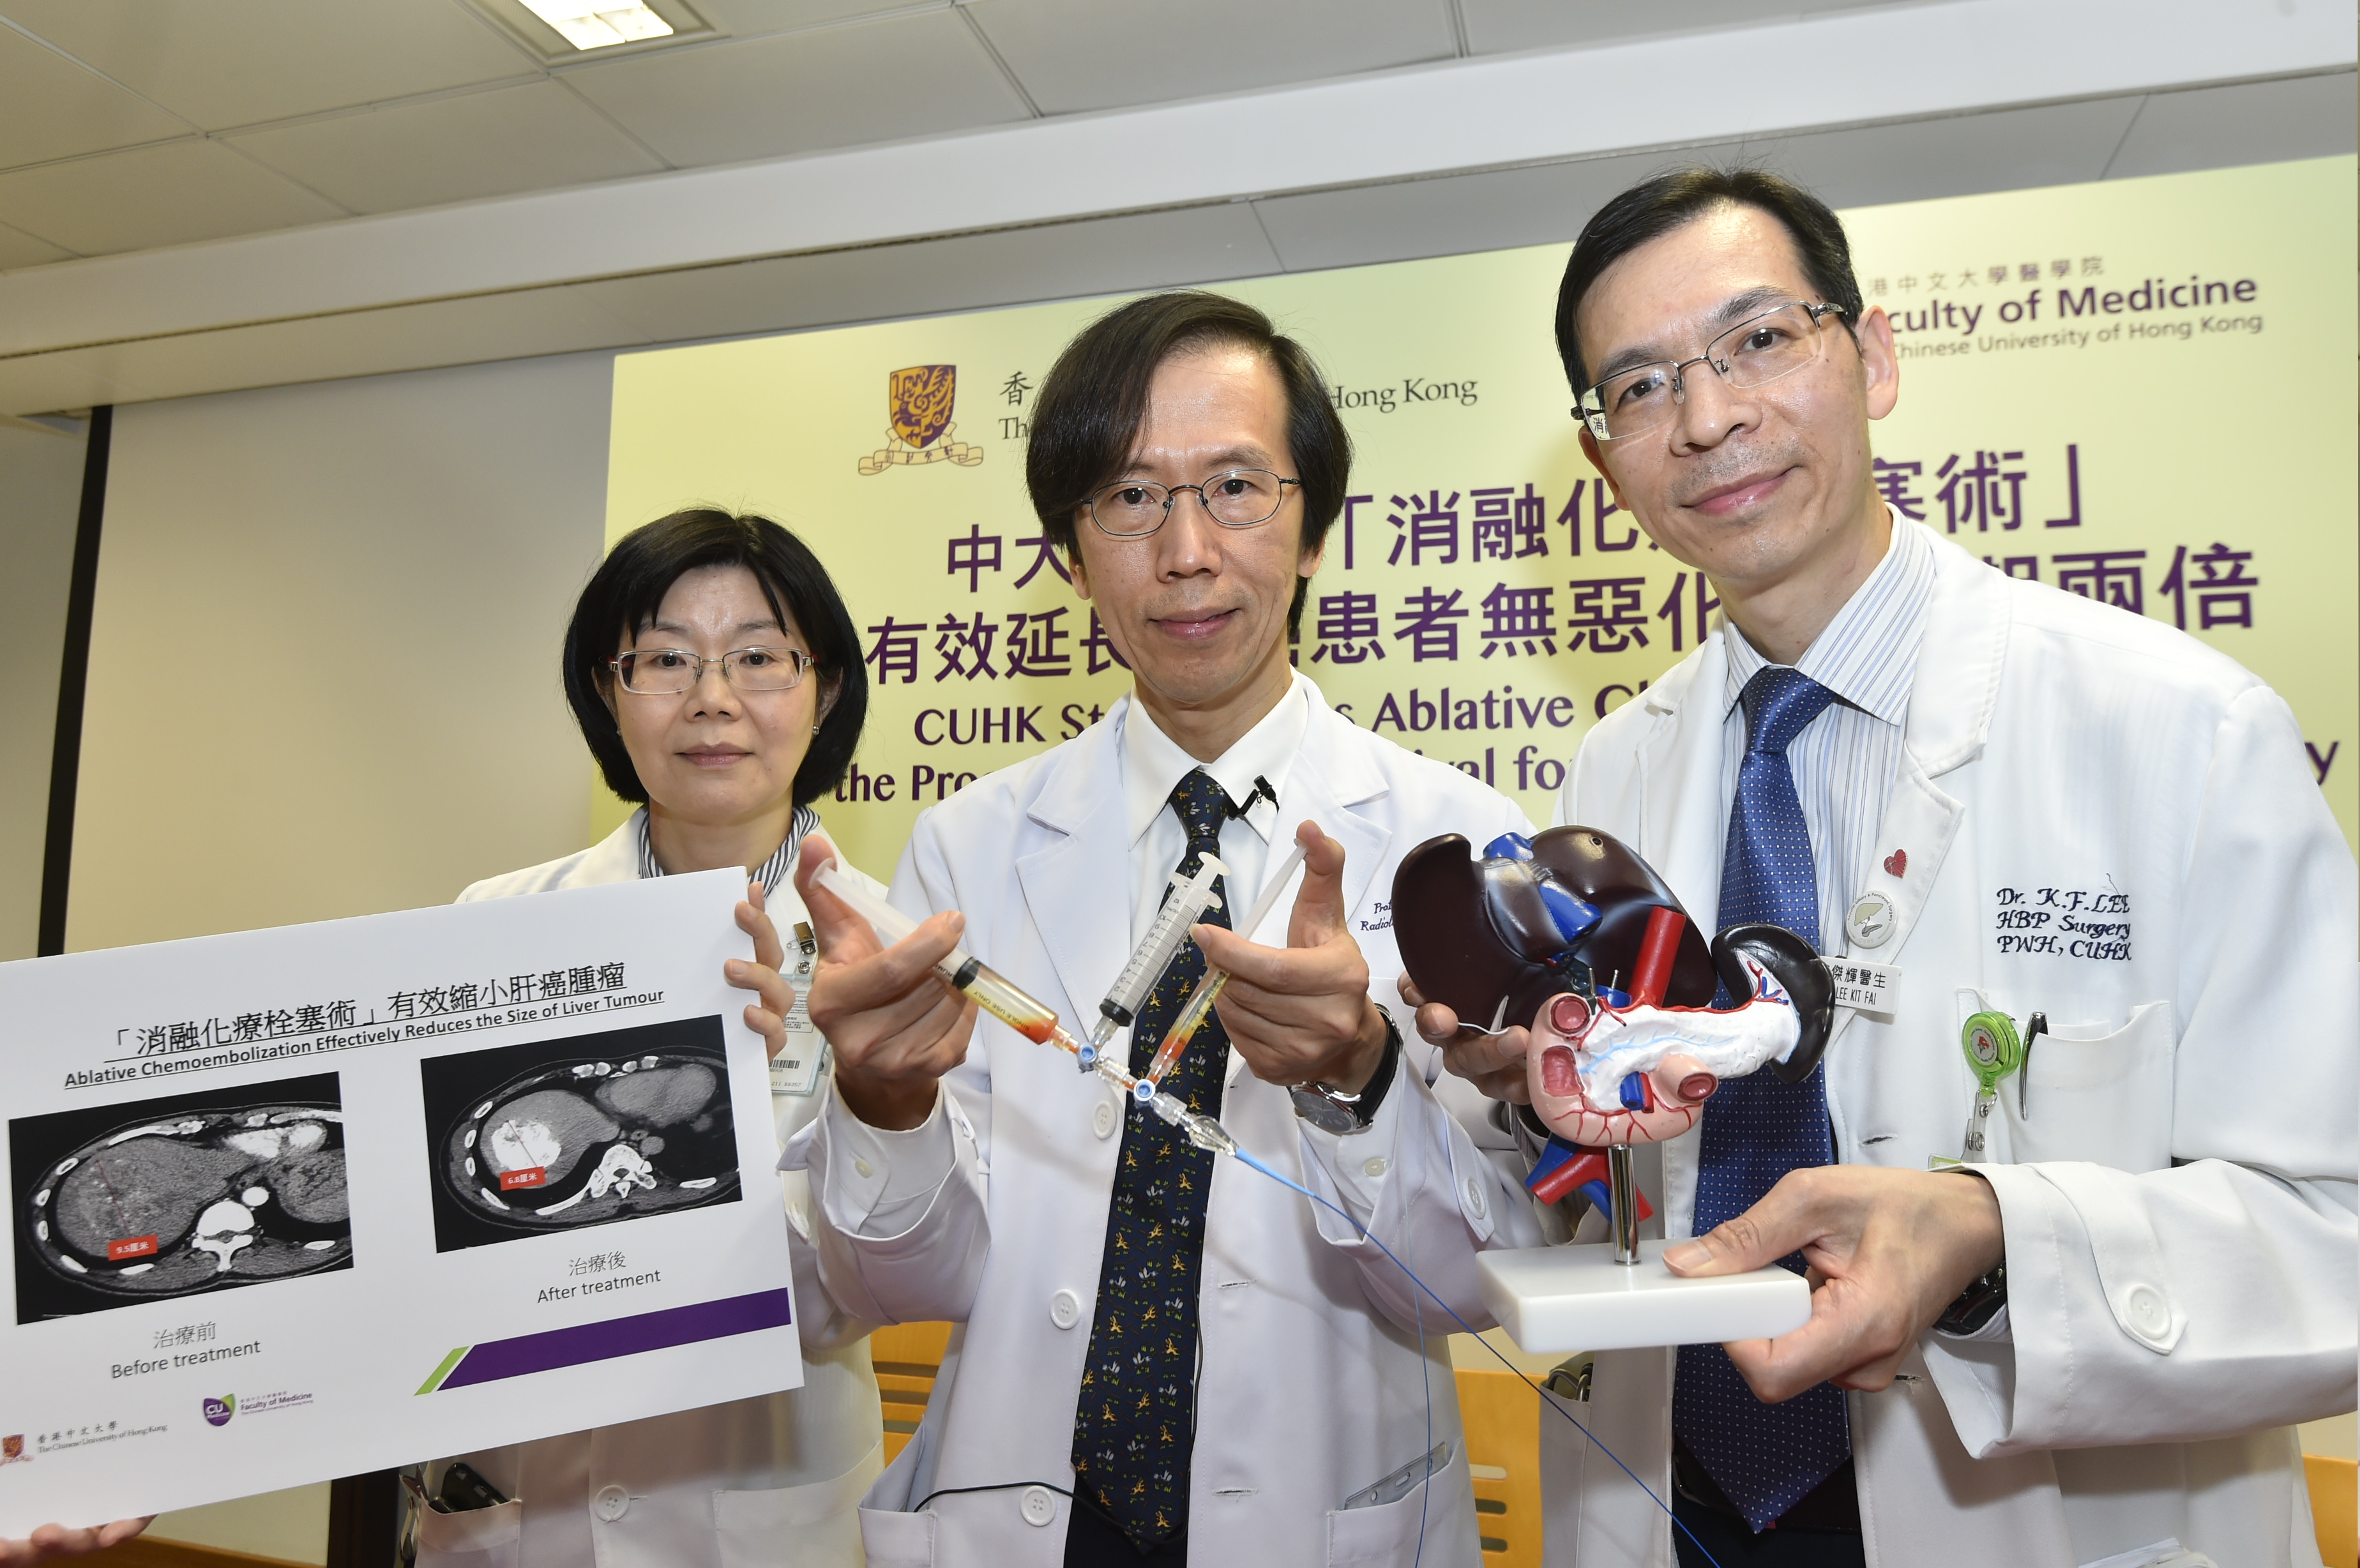 A study conducted by a multidisciplinary team of the Faculty of Medicine at CUHK proved that a new transarterial treatment named “Ablative Chemoembolization” (ACE) could double the progression-free survival of liver cancer patients at the intermediate stage, compared with conventional treatment. ACE is more effective in killing tumour cells of liver cancer patients and some of them could receive hepatectomy, with the aim of curing the disease. From left: Prof. Winnie YEO, Professor of the Department of Clinical Oncology; Prof. Simon YU, Chairman of the Department of Imaging and Interventional Radiology; Dr. Kit Fai LEE, Clinical Associate Professor (honorary) of the Department of Surgery, from the Faculty of Medicine at CUHK. 